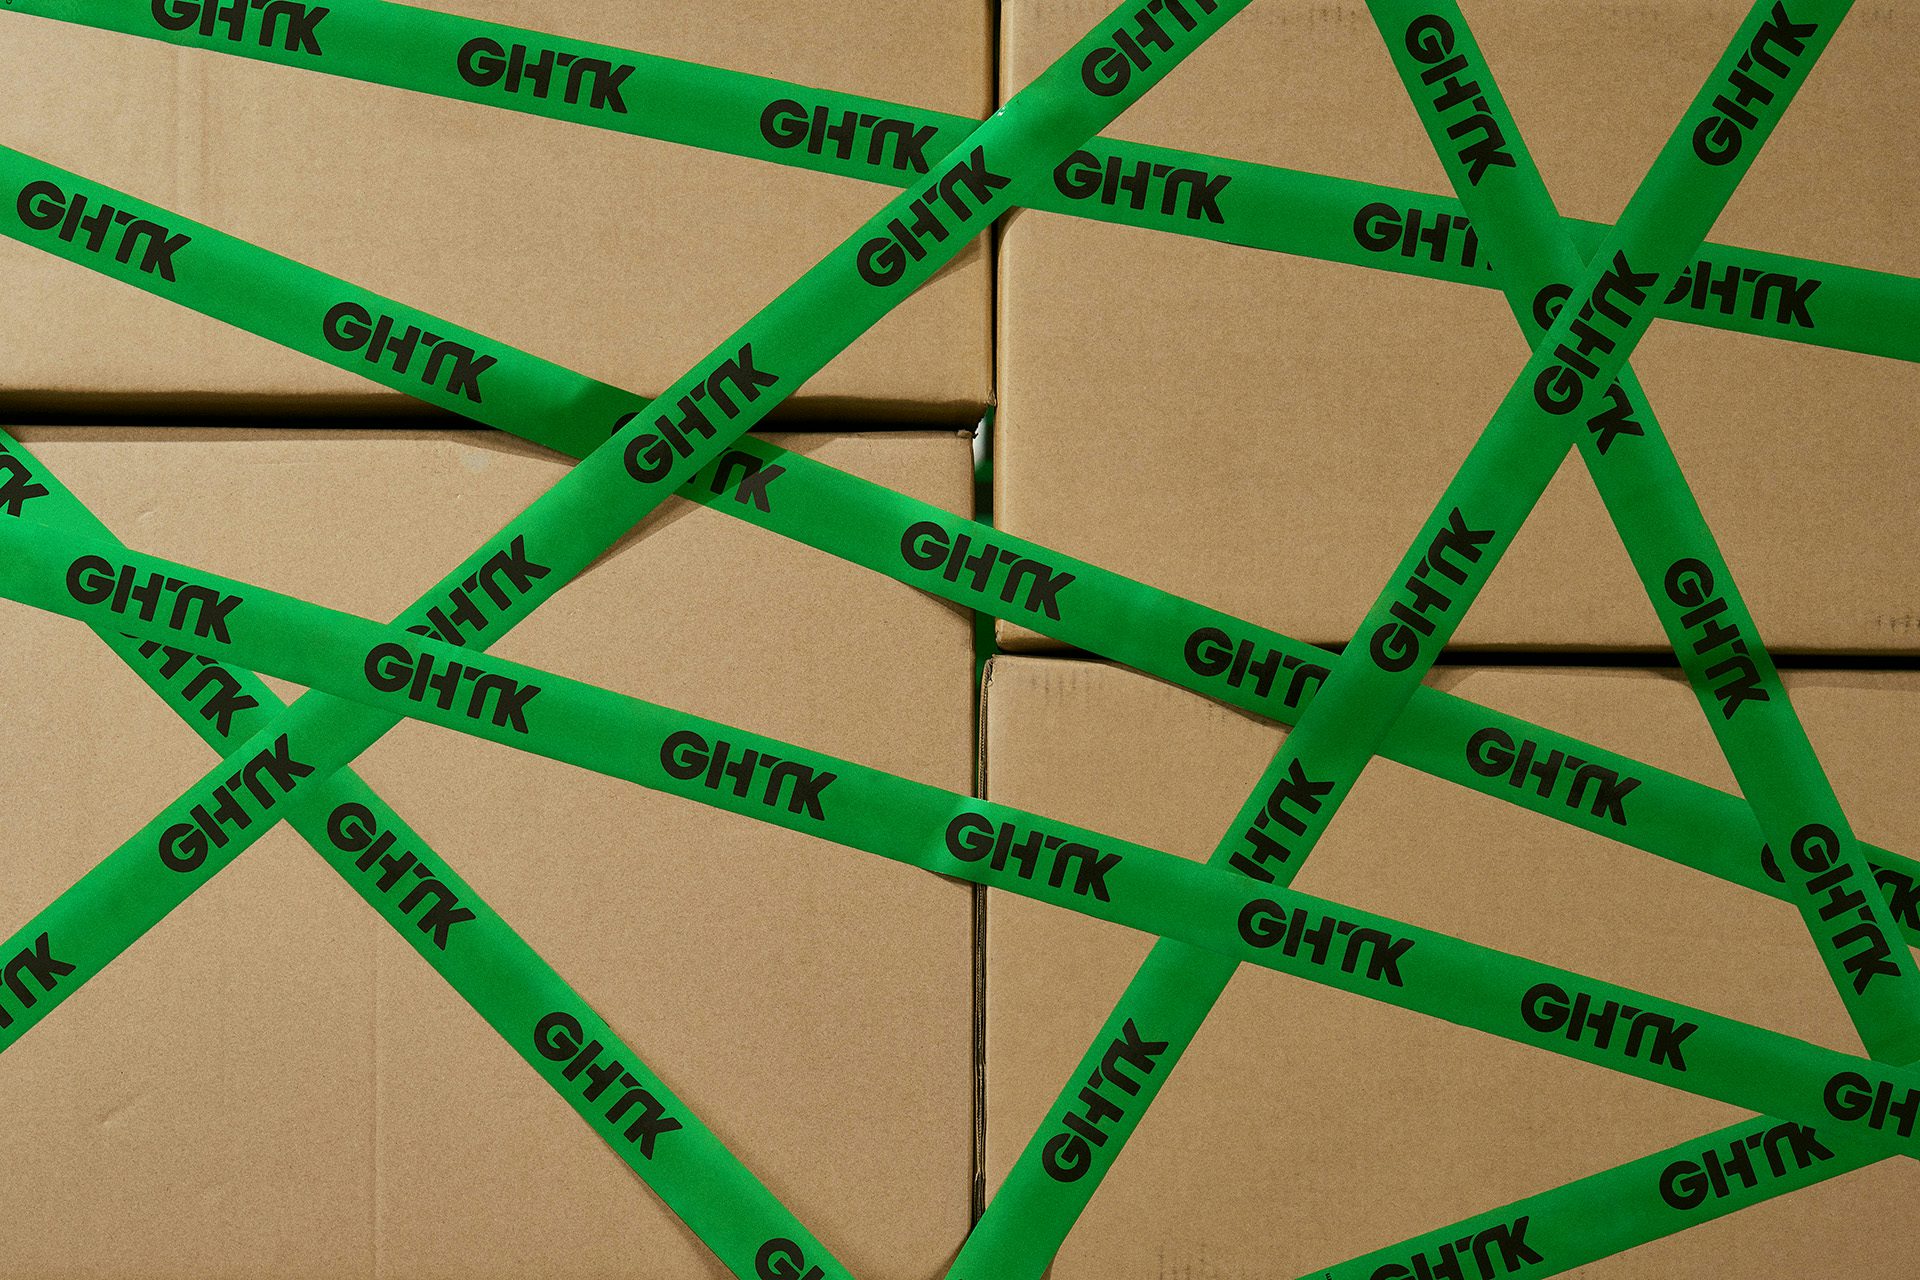 Photo of a stack of cardboard boxes covered in green tape featuring the new GHTK branding, including a black uppercase wordmark featuring cut out details on the letters